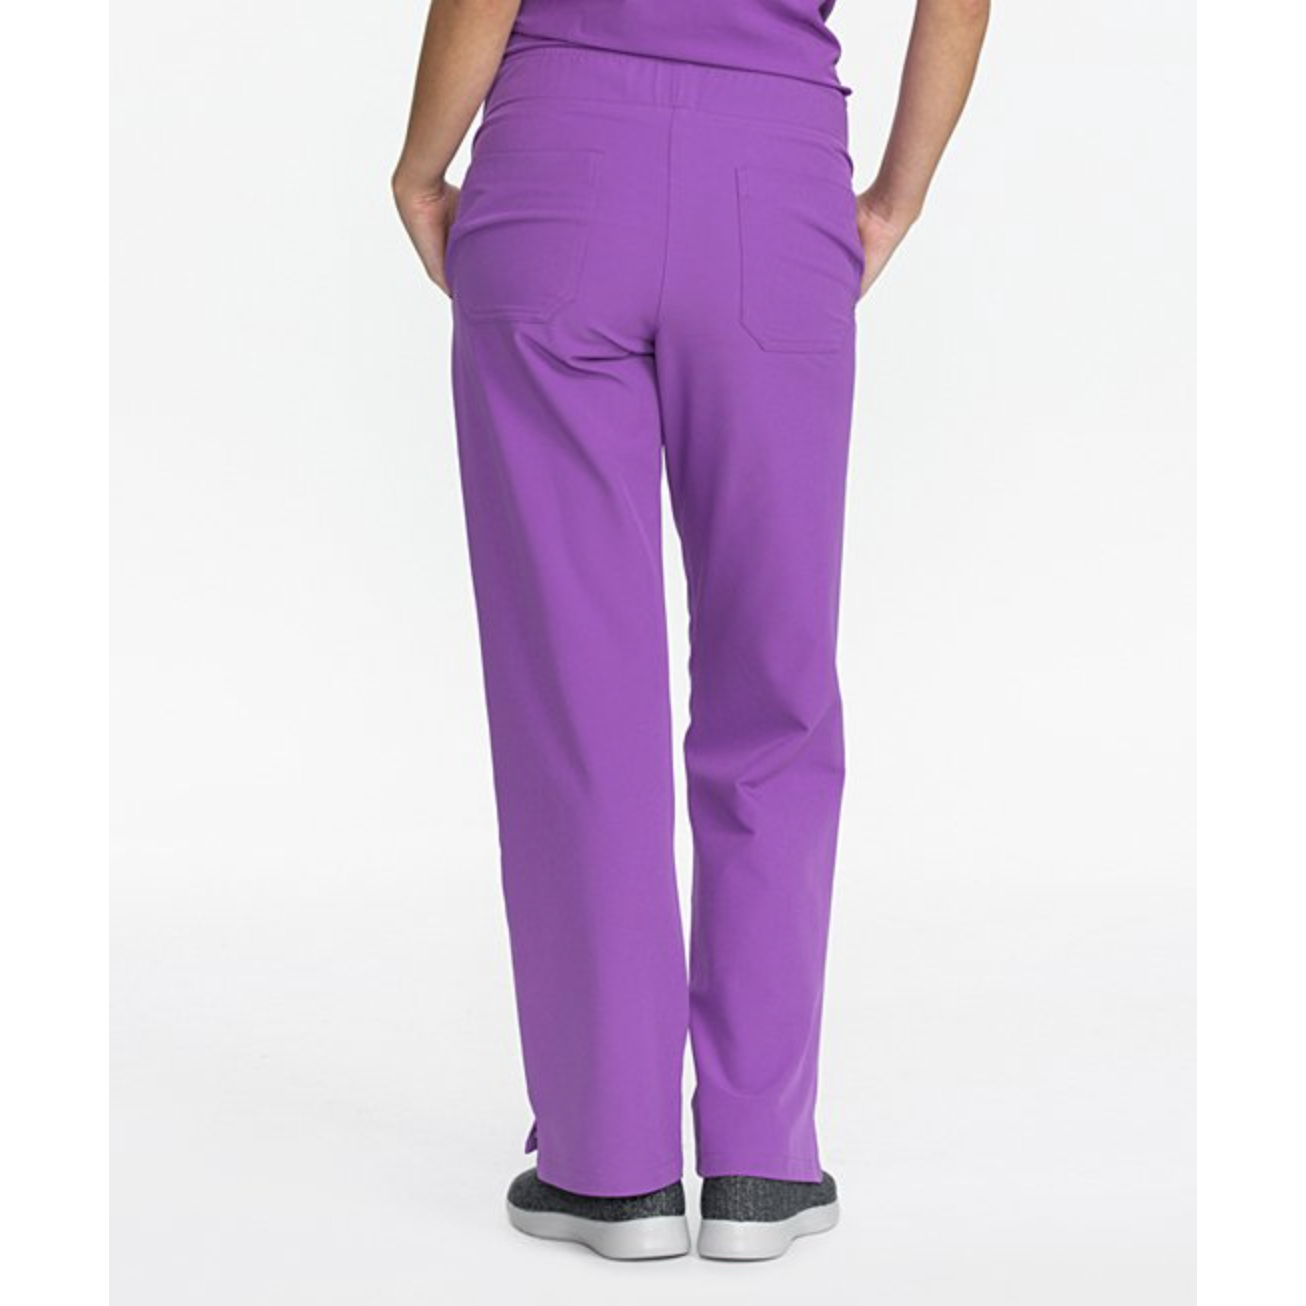 Four Way Bliss pant KLW18B2 *SALE!*